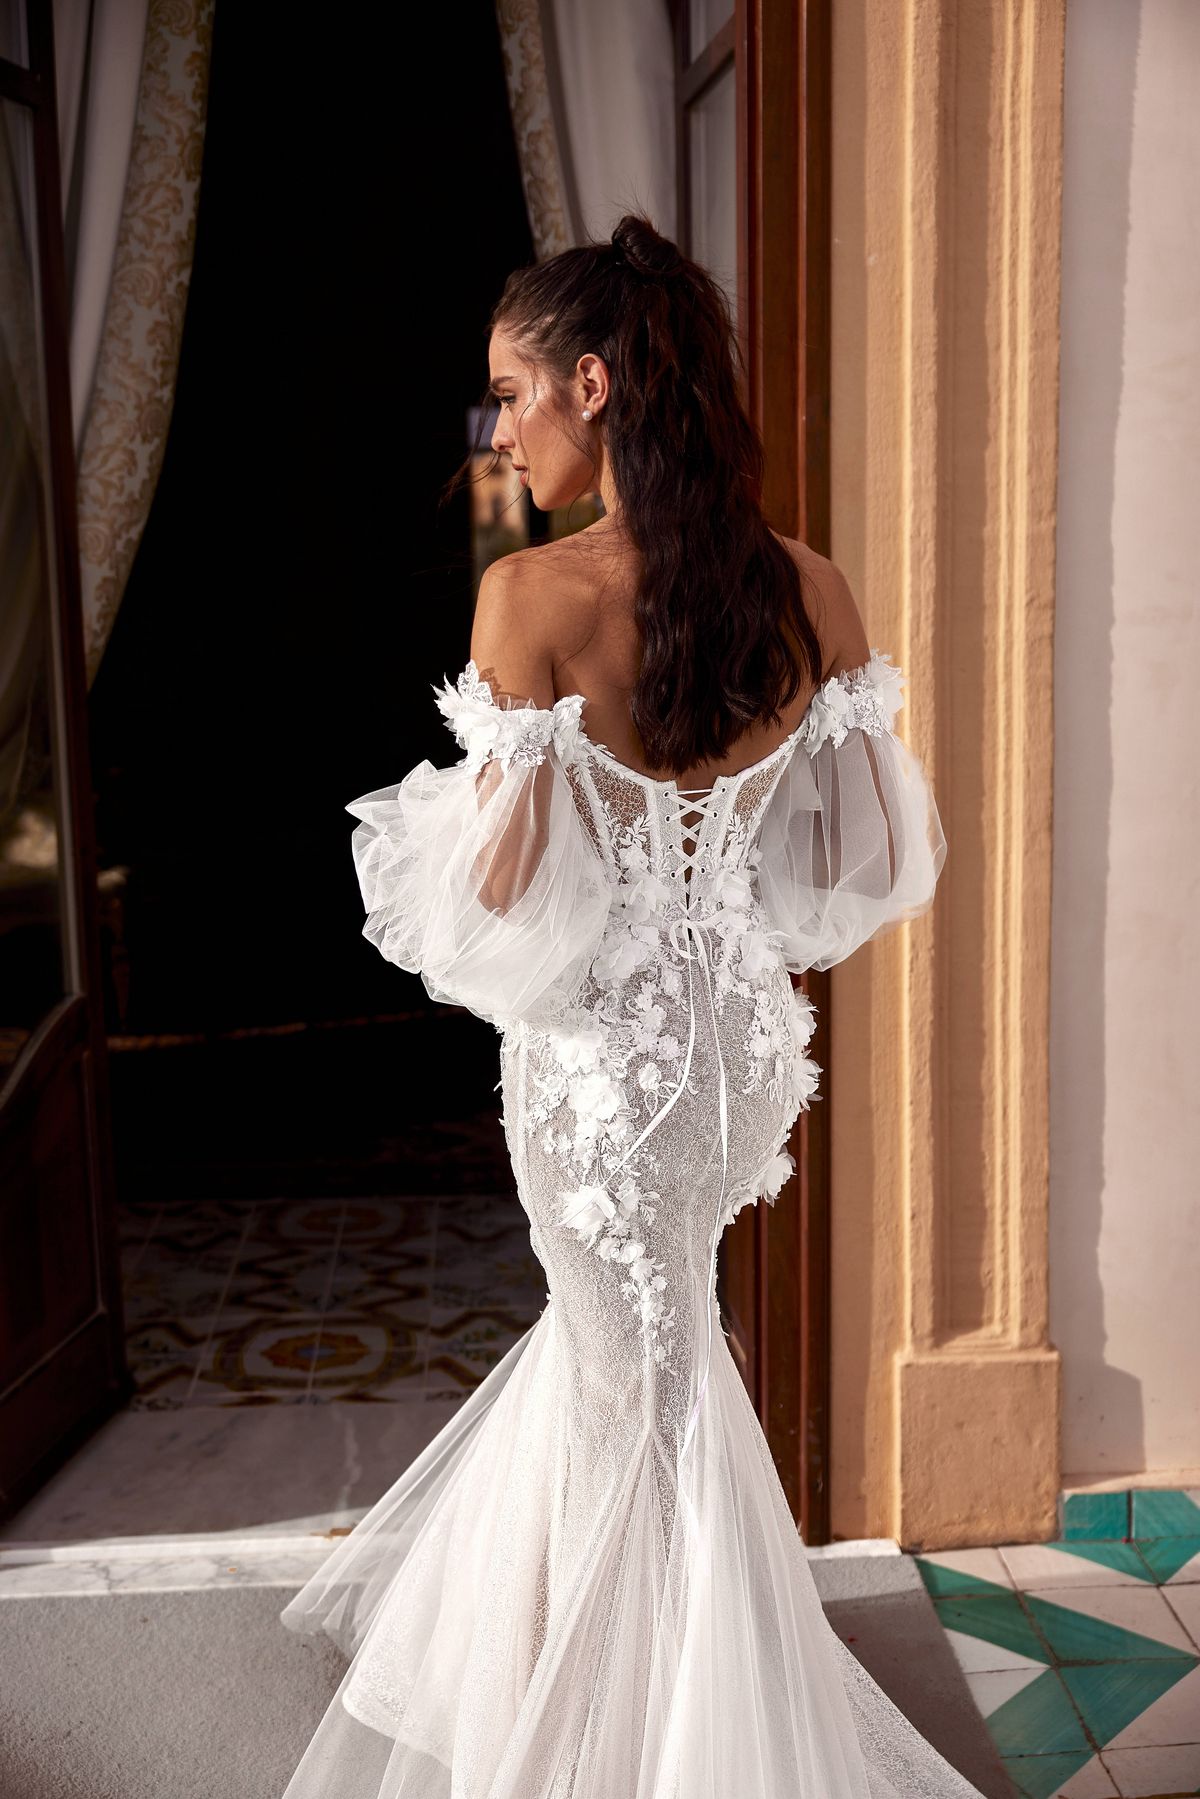 Mermaid lace wedding dress Polina with removable voluminous sleeves and decorated with flowers by rara avis designer. 5